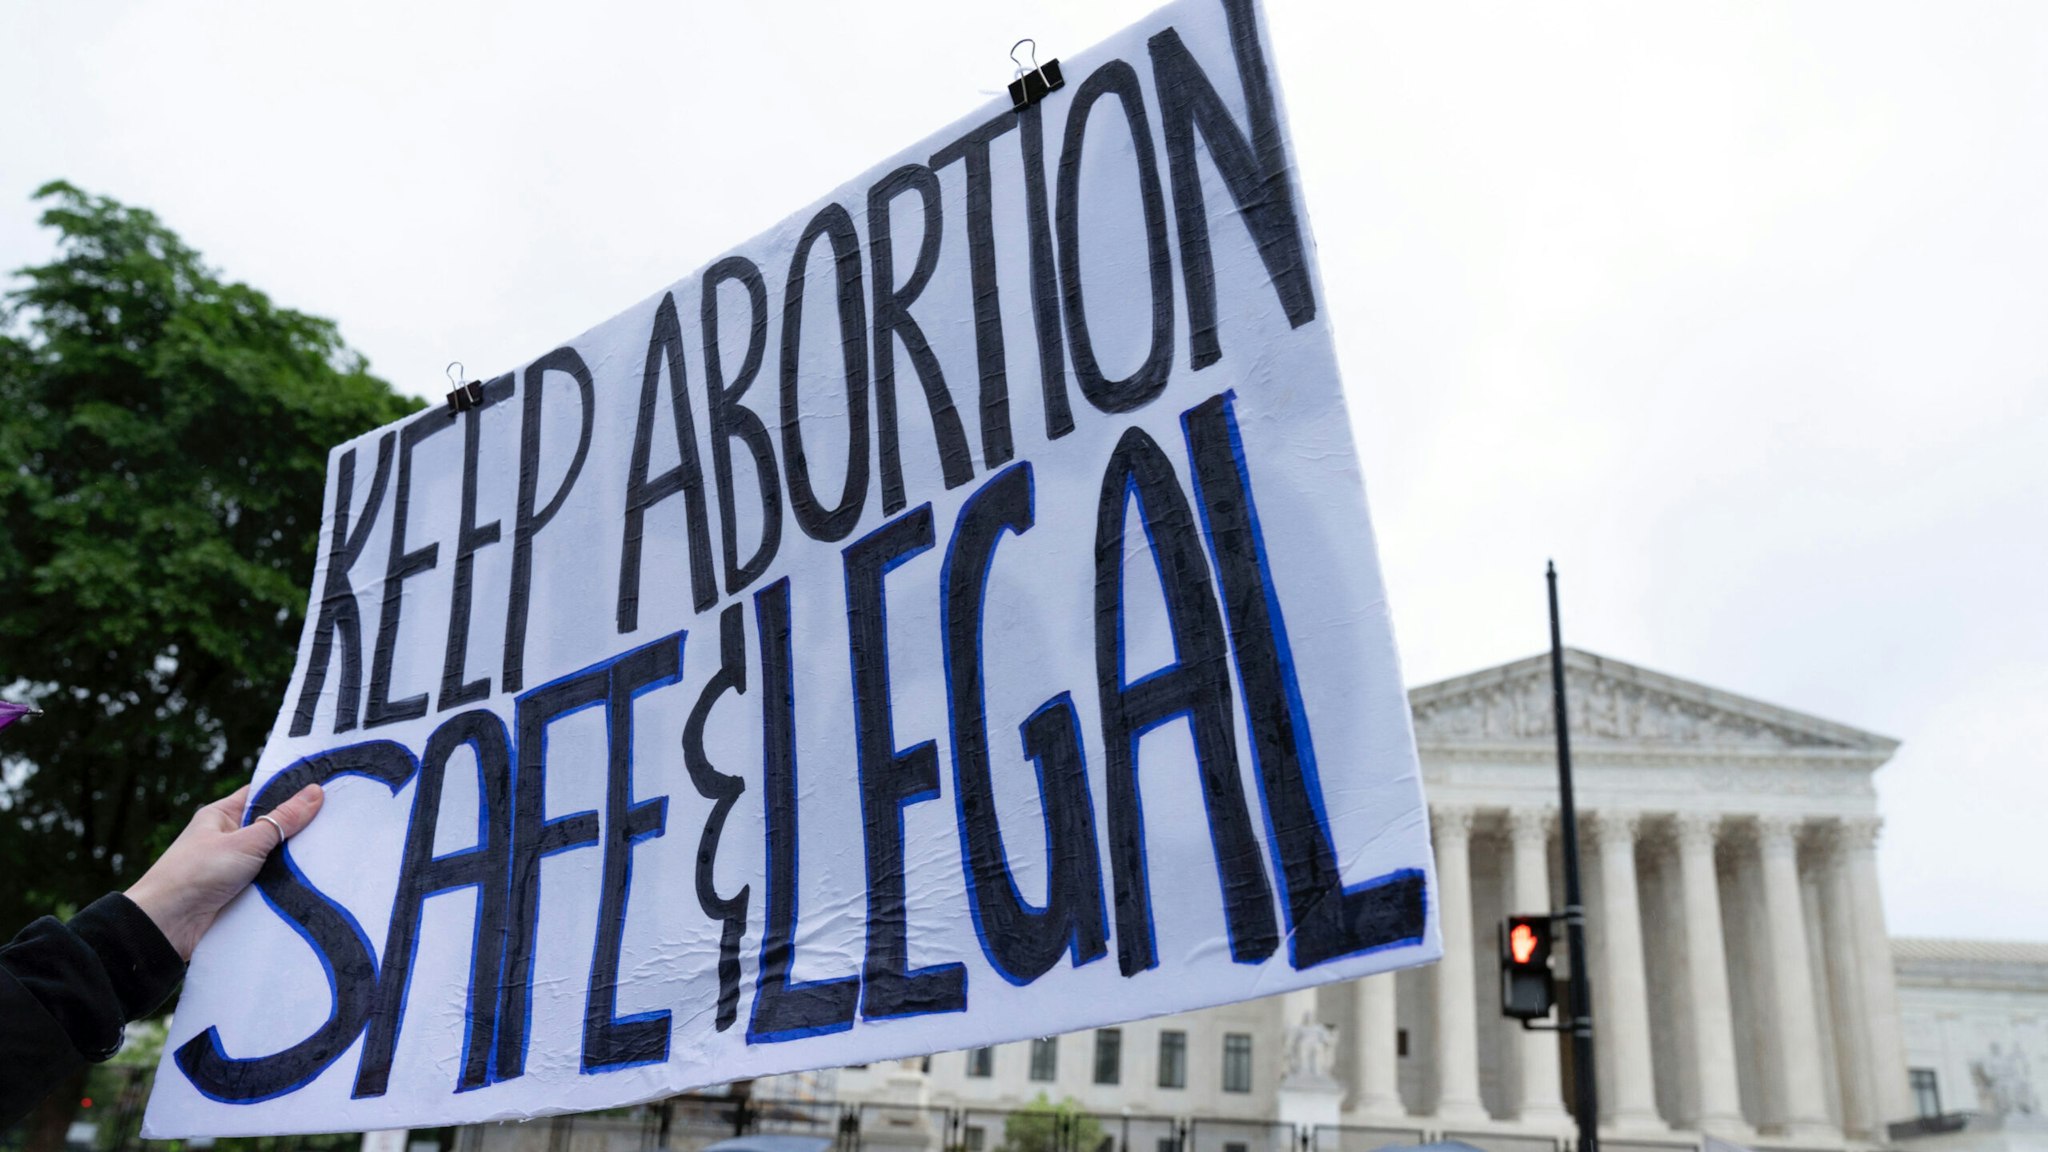 Pro-abortion demonstrators rally for abortion rights in front of the US Supreme Court in Washington, DC, on May 7, 2022.